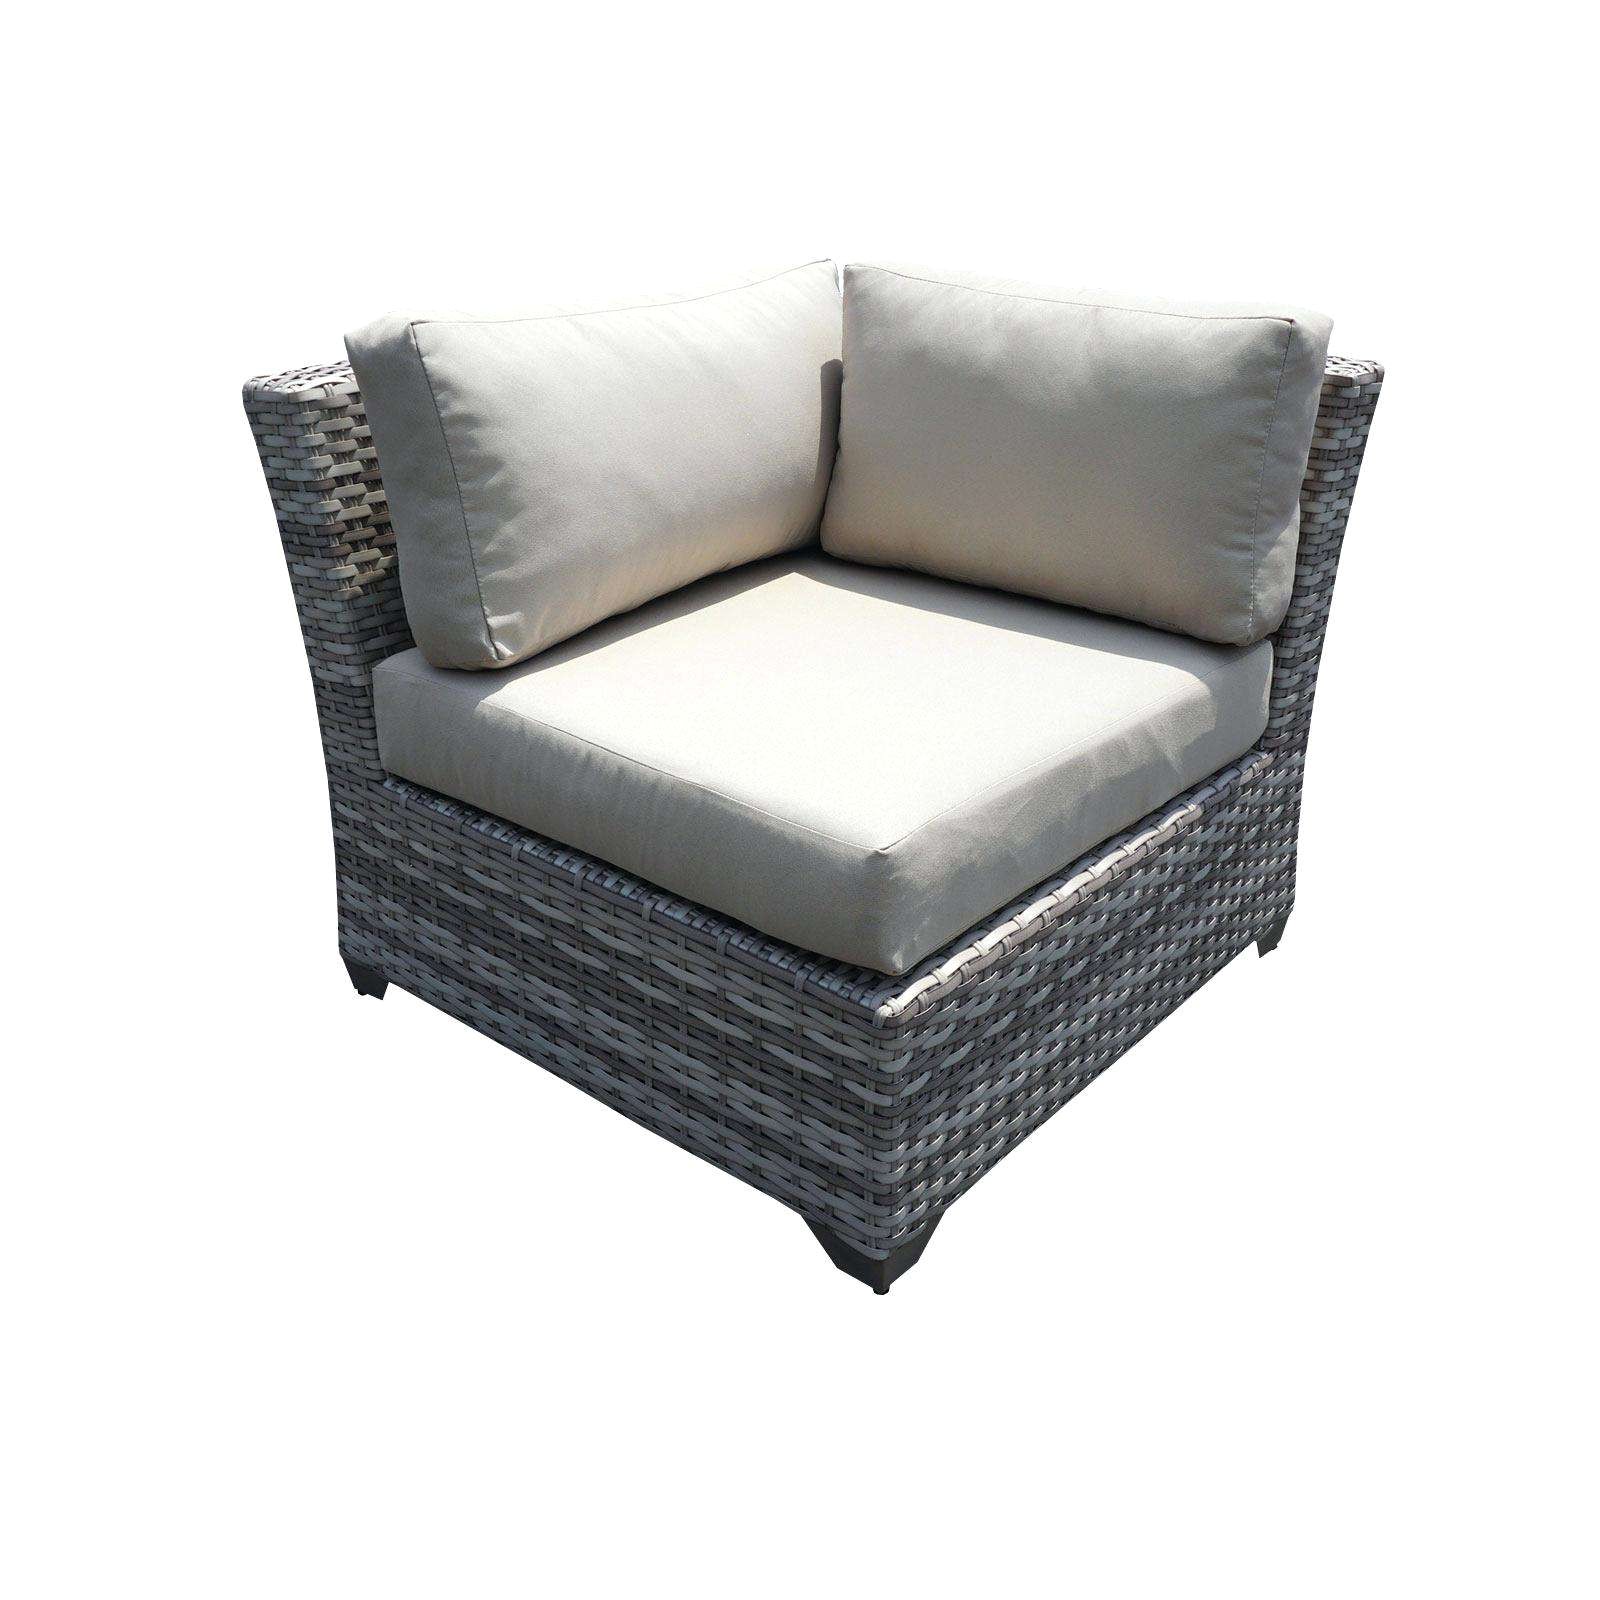 wicker outdoor sofa 0d patio chairs sale replacement cushions scheme of deep seat replacement cushions